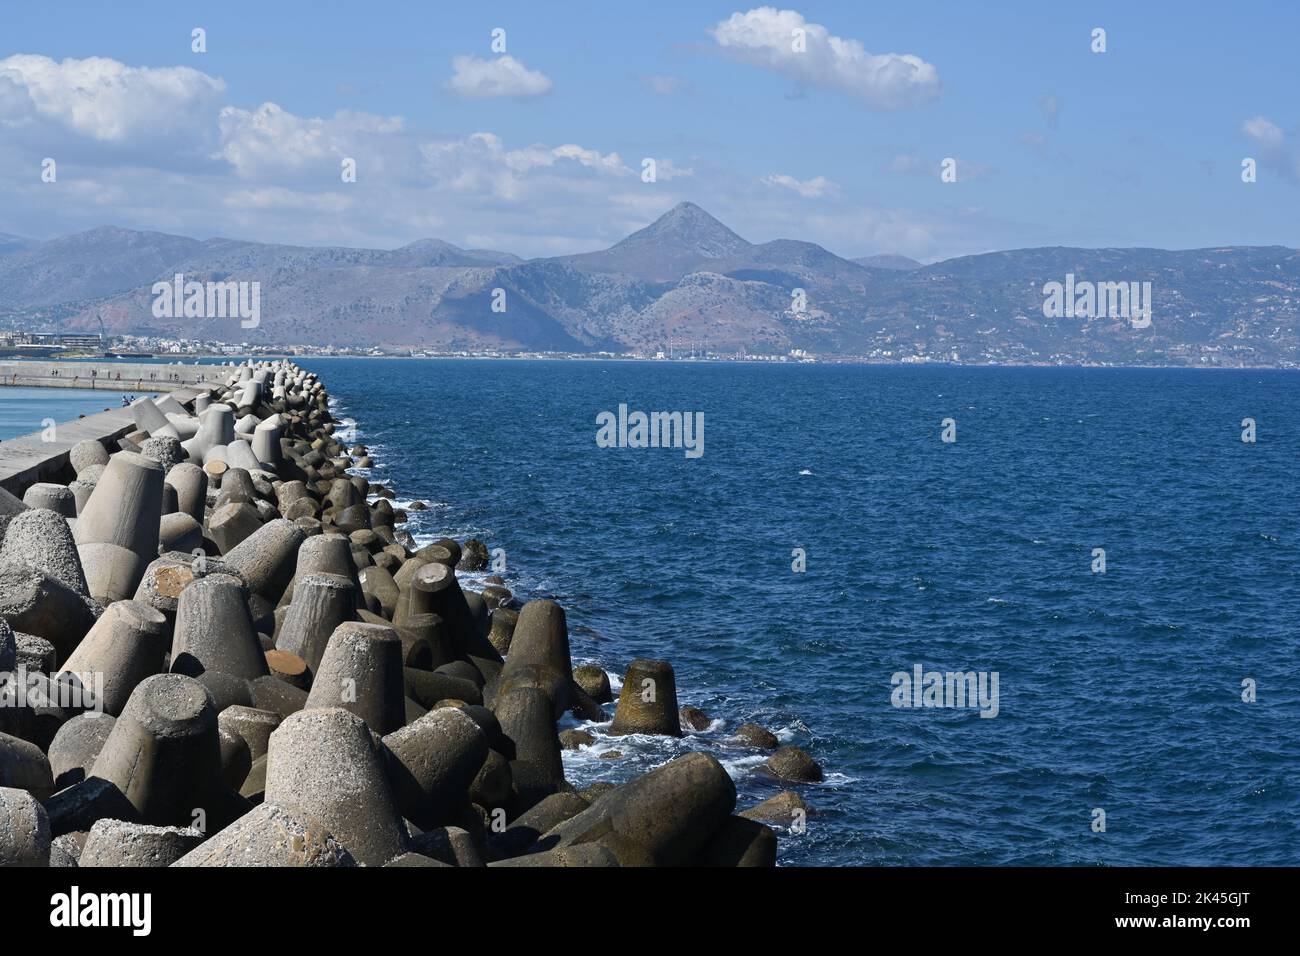 Concrete tetrapod breakwater stones piled up in wave breaker to protect Port of Heraklion, Stock Photo